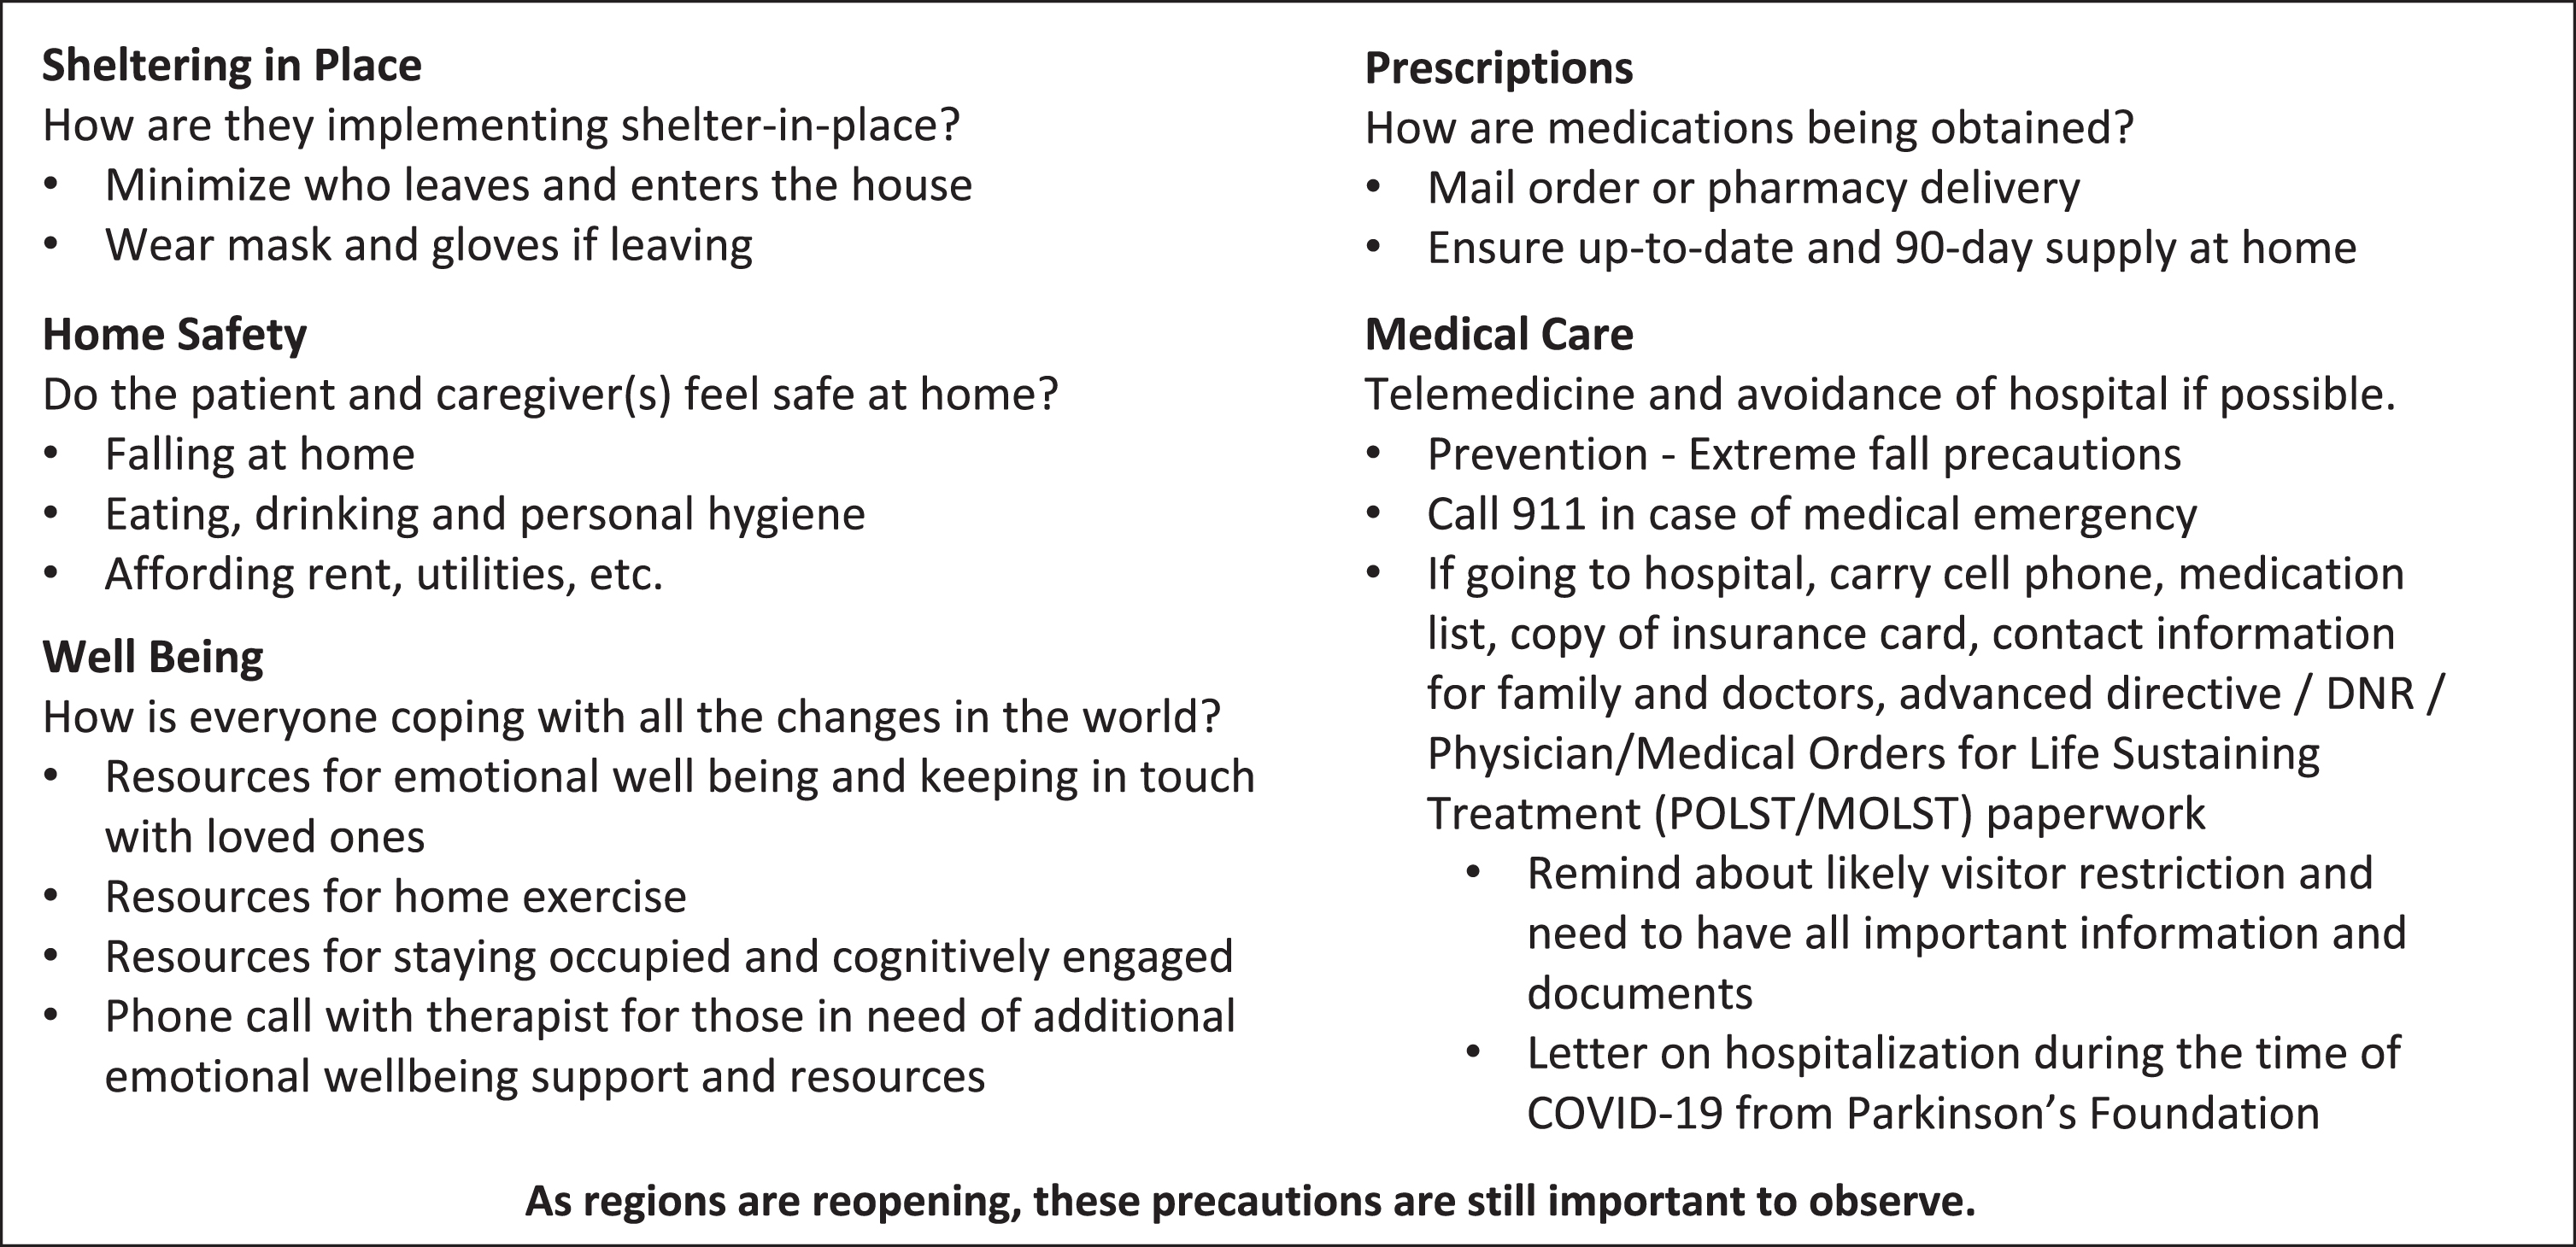 Talking points developed for COVID-19 outreach program involving telephone calls to vulnerable patients.